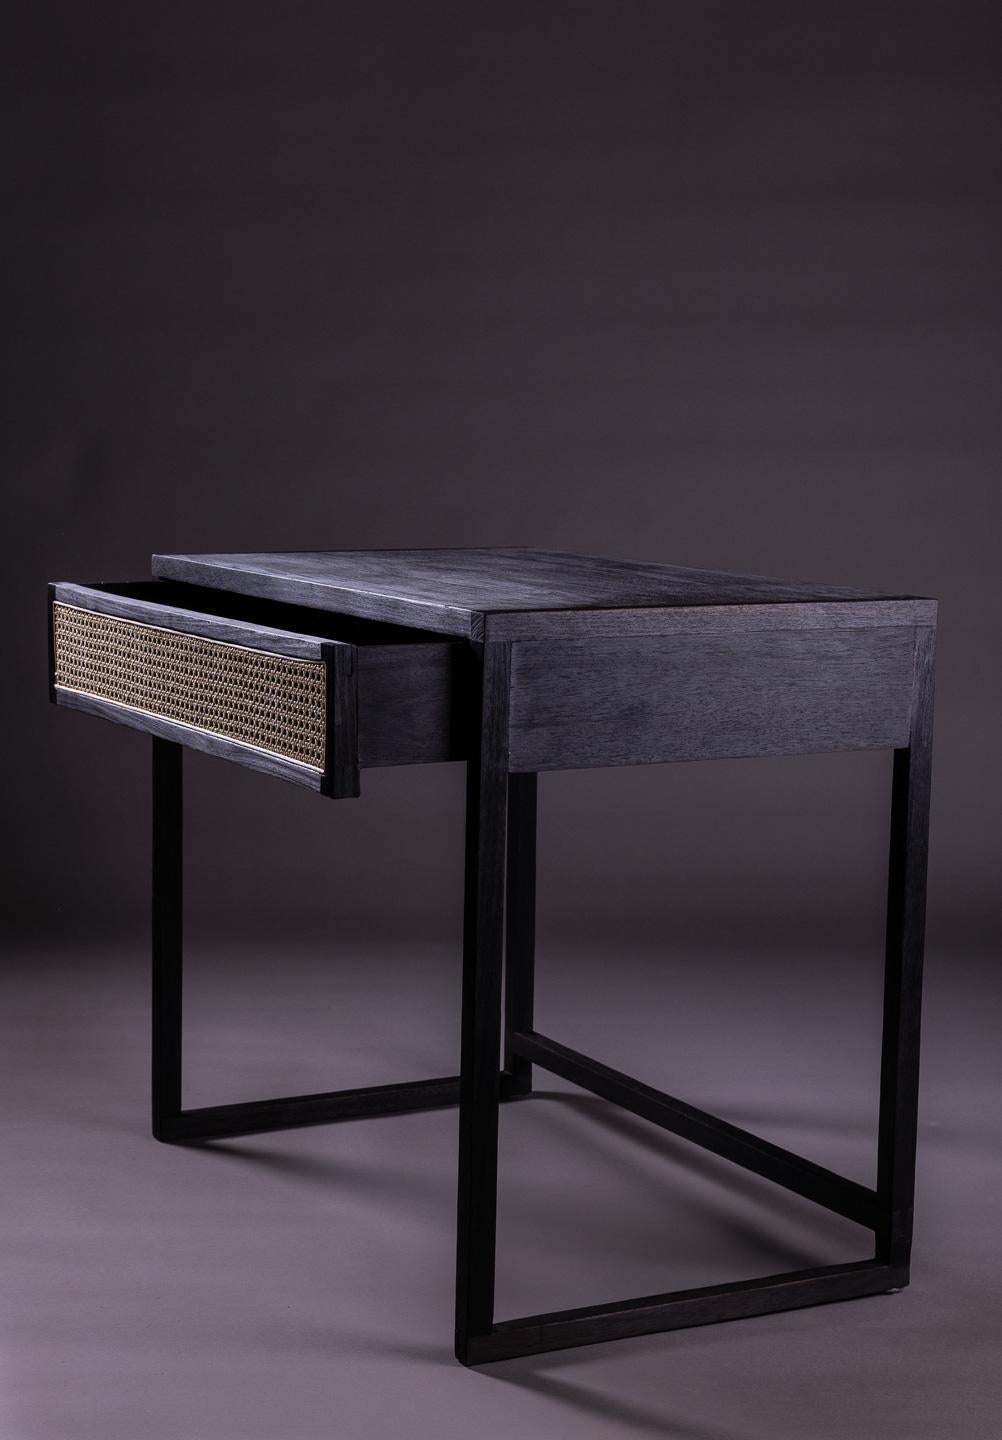 Hand-Crafted The Square Desk, Square Armchair, Carbonized Finish with Shou Sugi Ban, Japanese For Sale